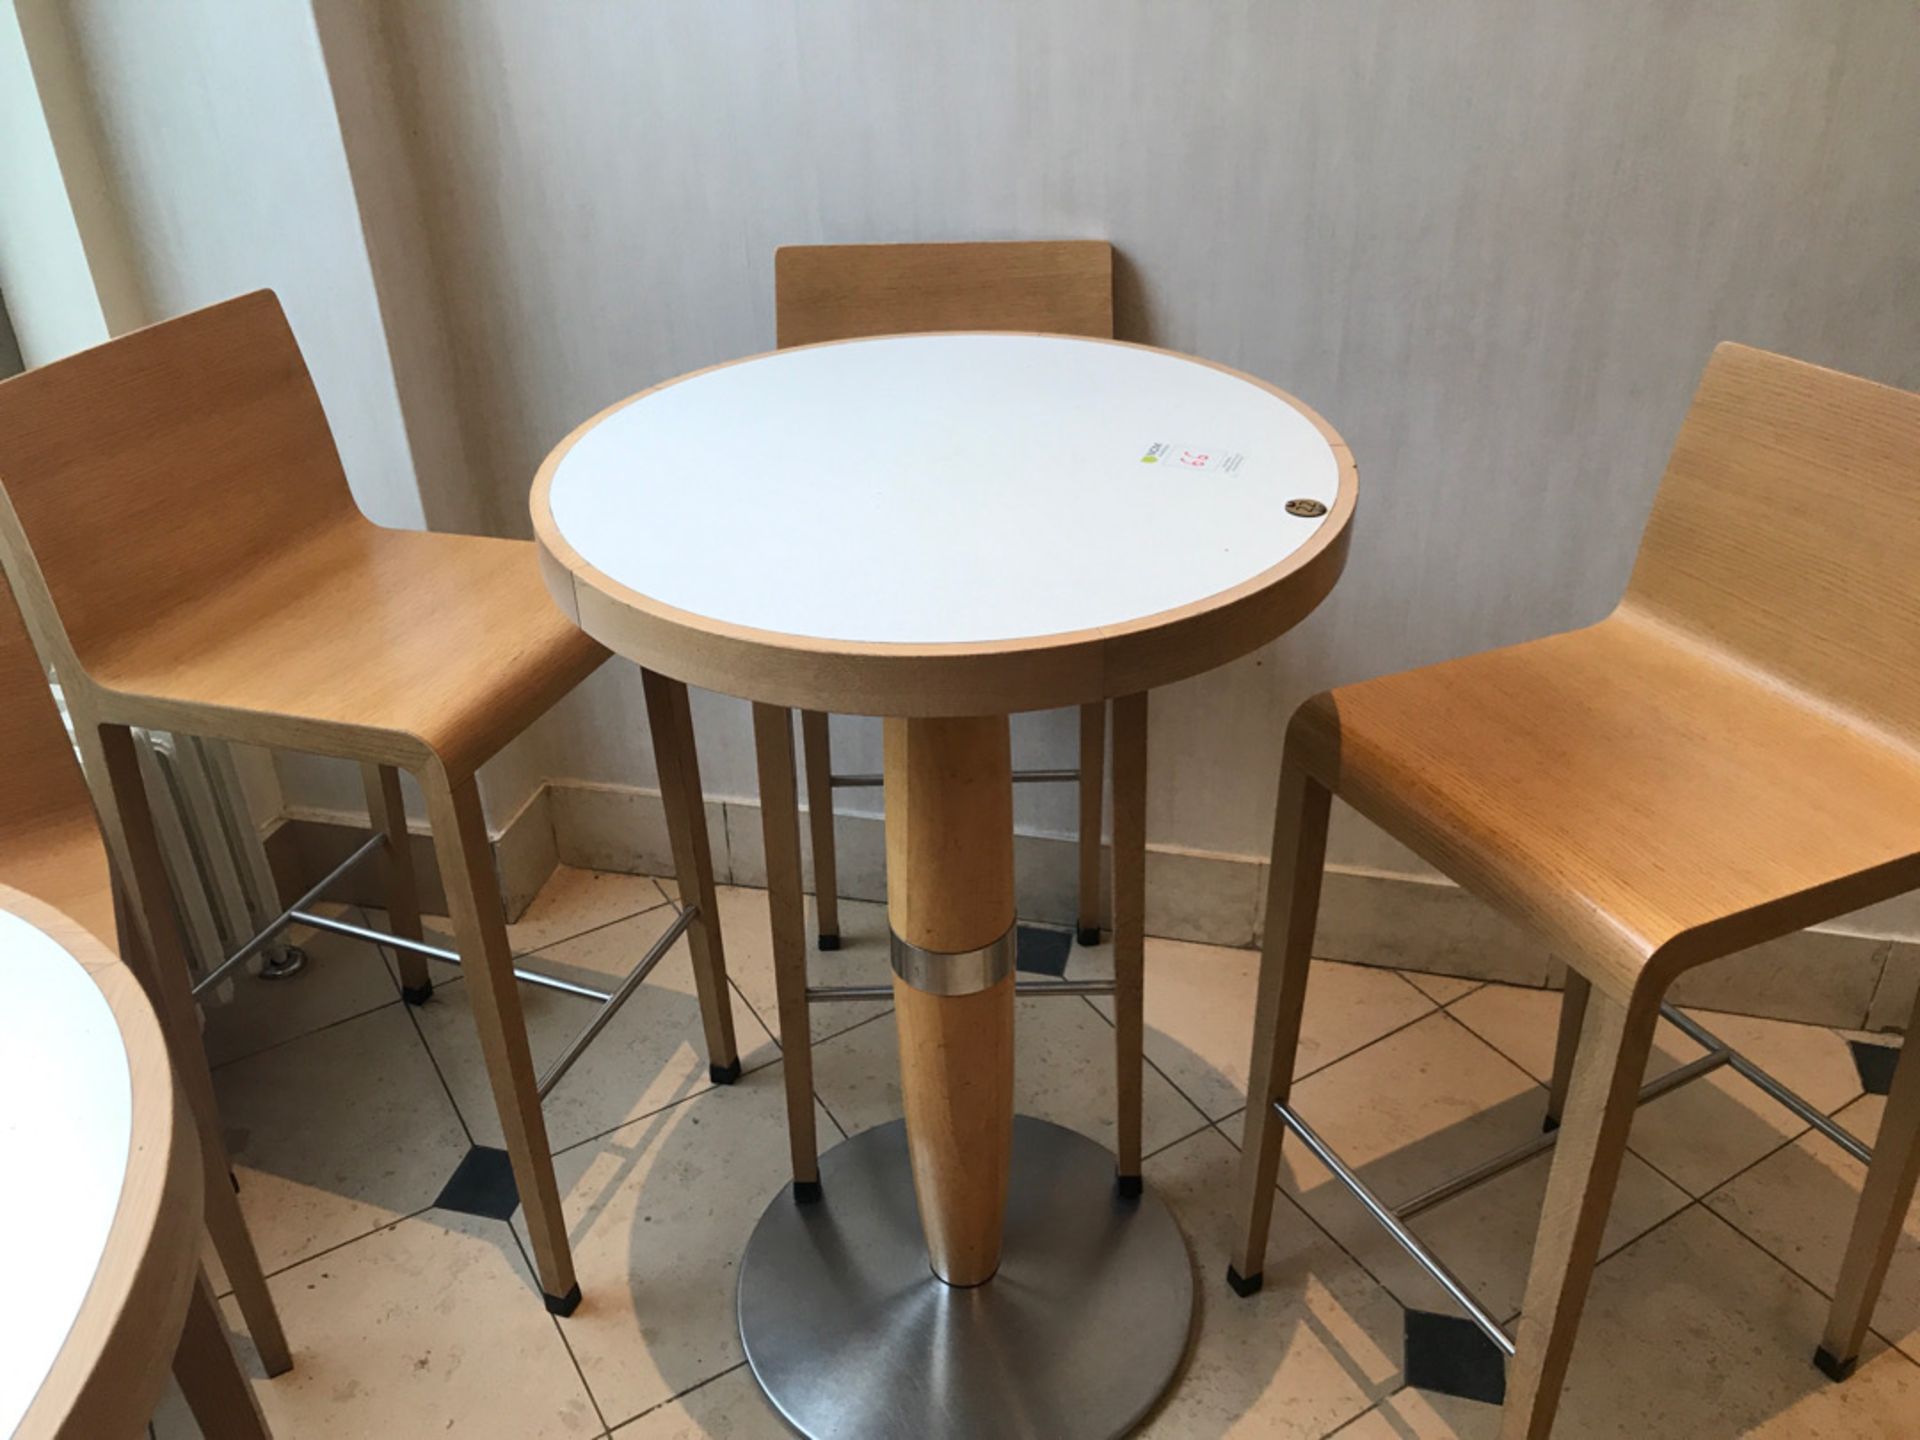 Tall pedestal table with three stool chairs